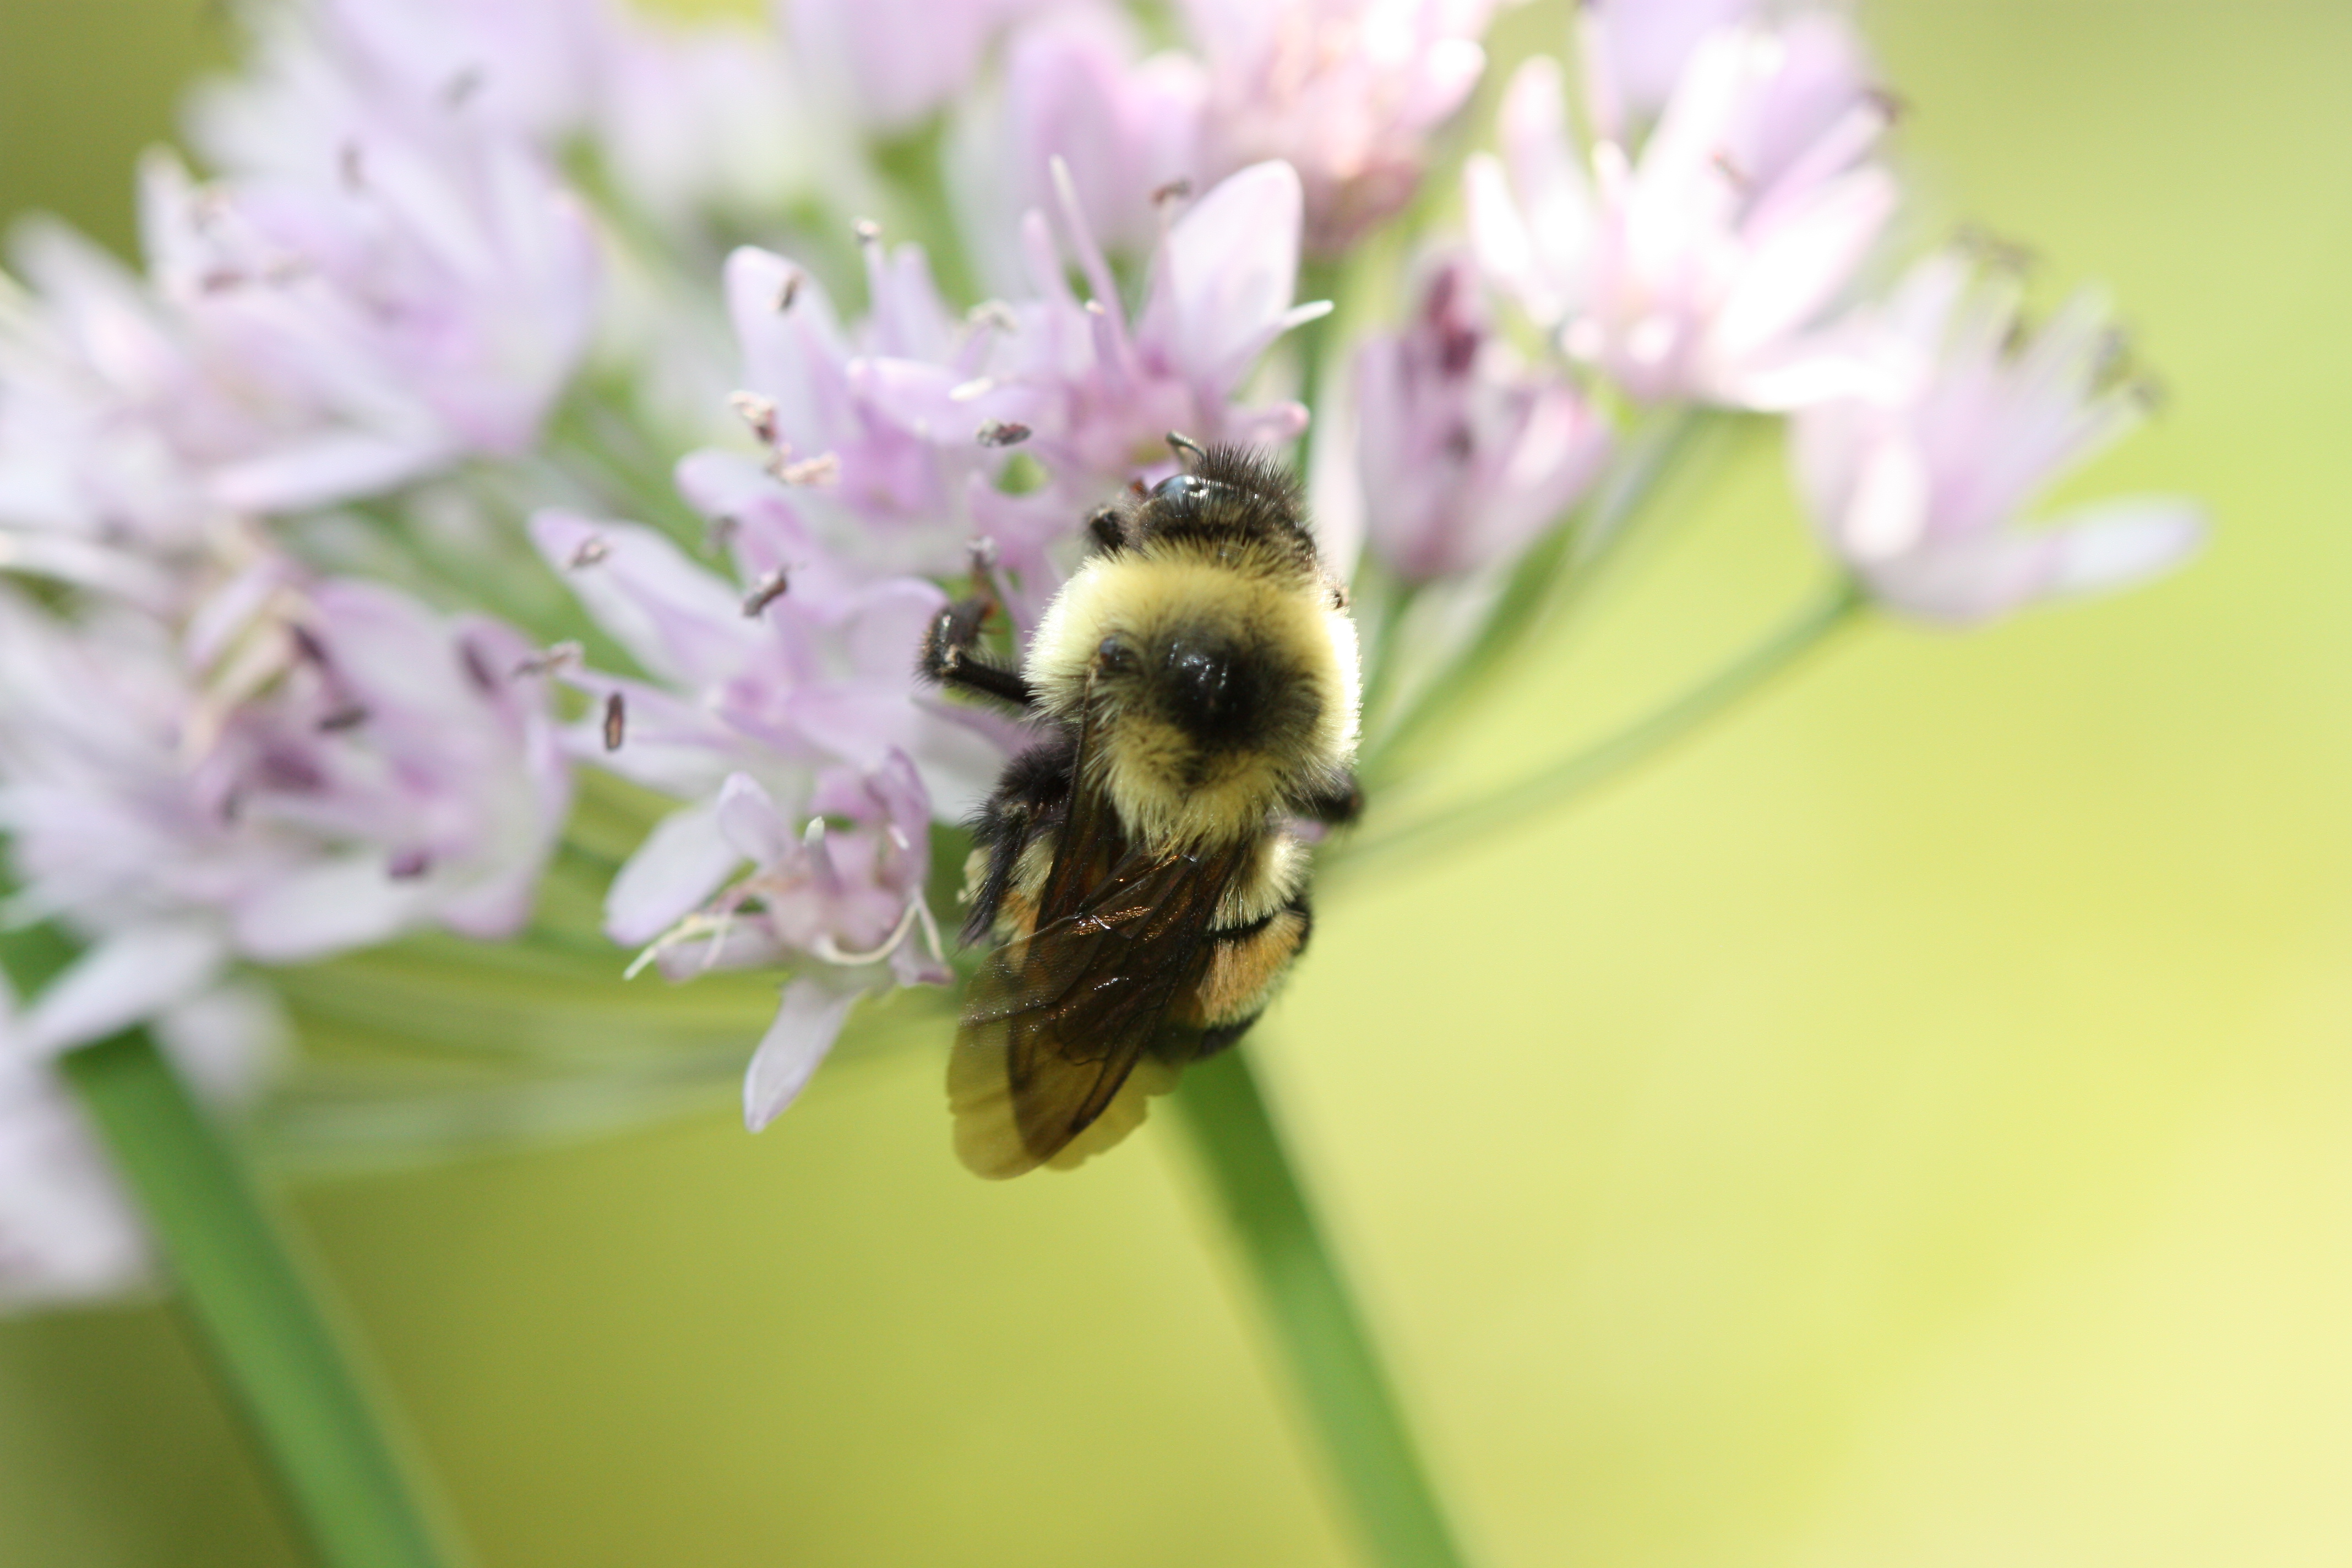 A bumble bee holds on to a group of small pale pink flowers on a single stem.